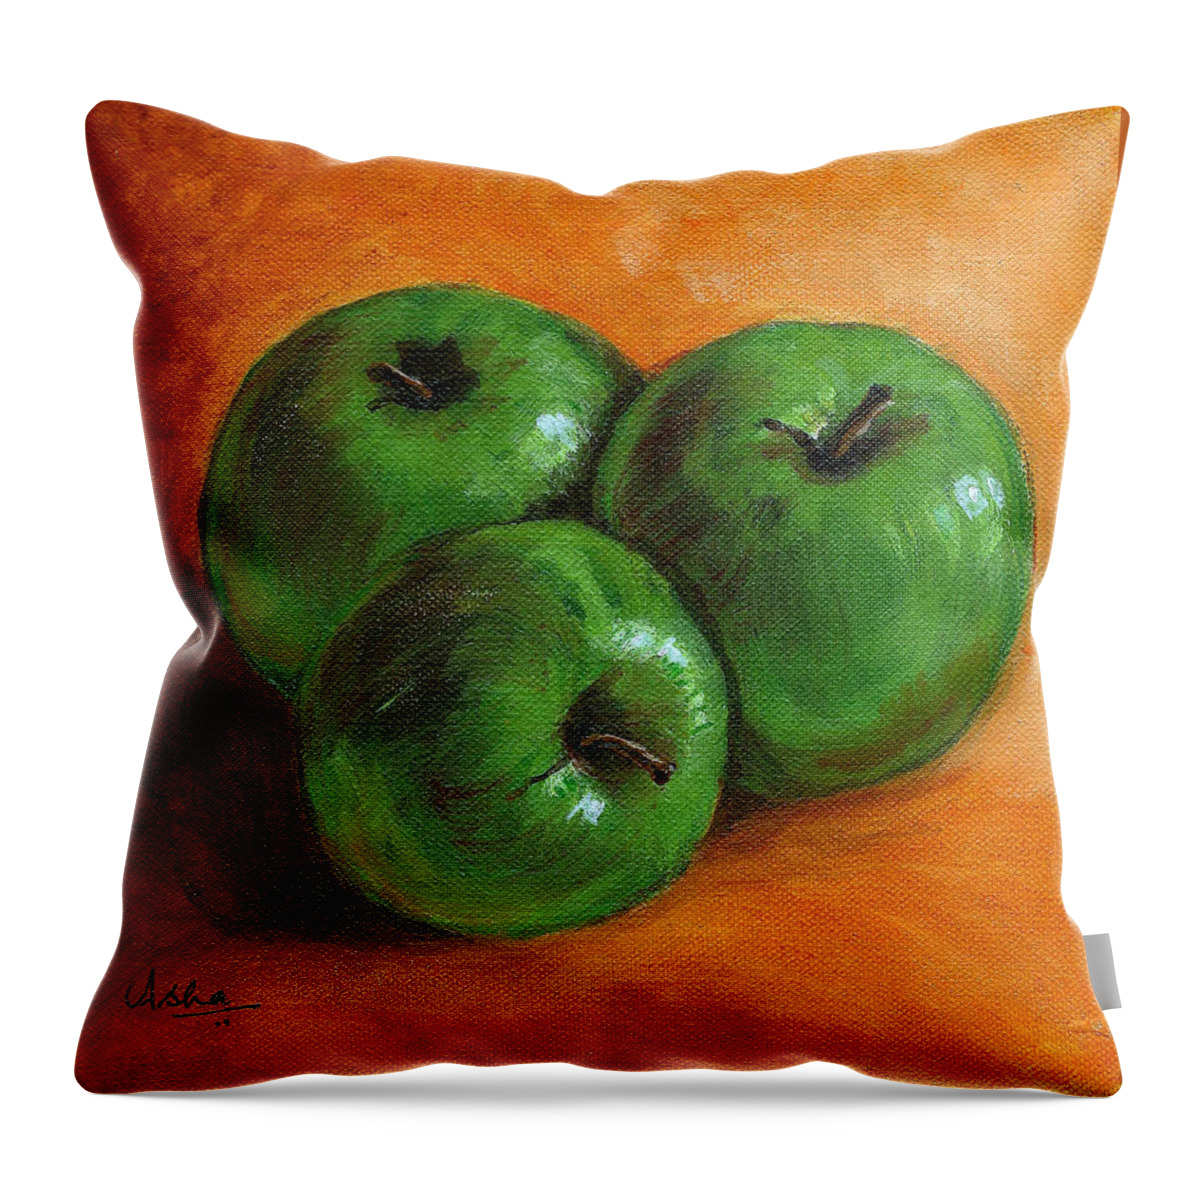 Apples Throw Pillow featuring the painting Green Apples by Asha Sudhaker Shenoy